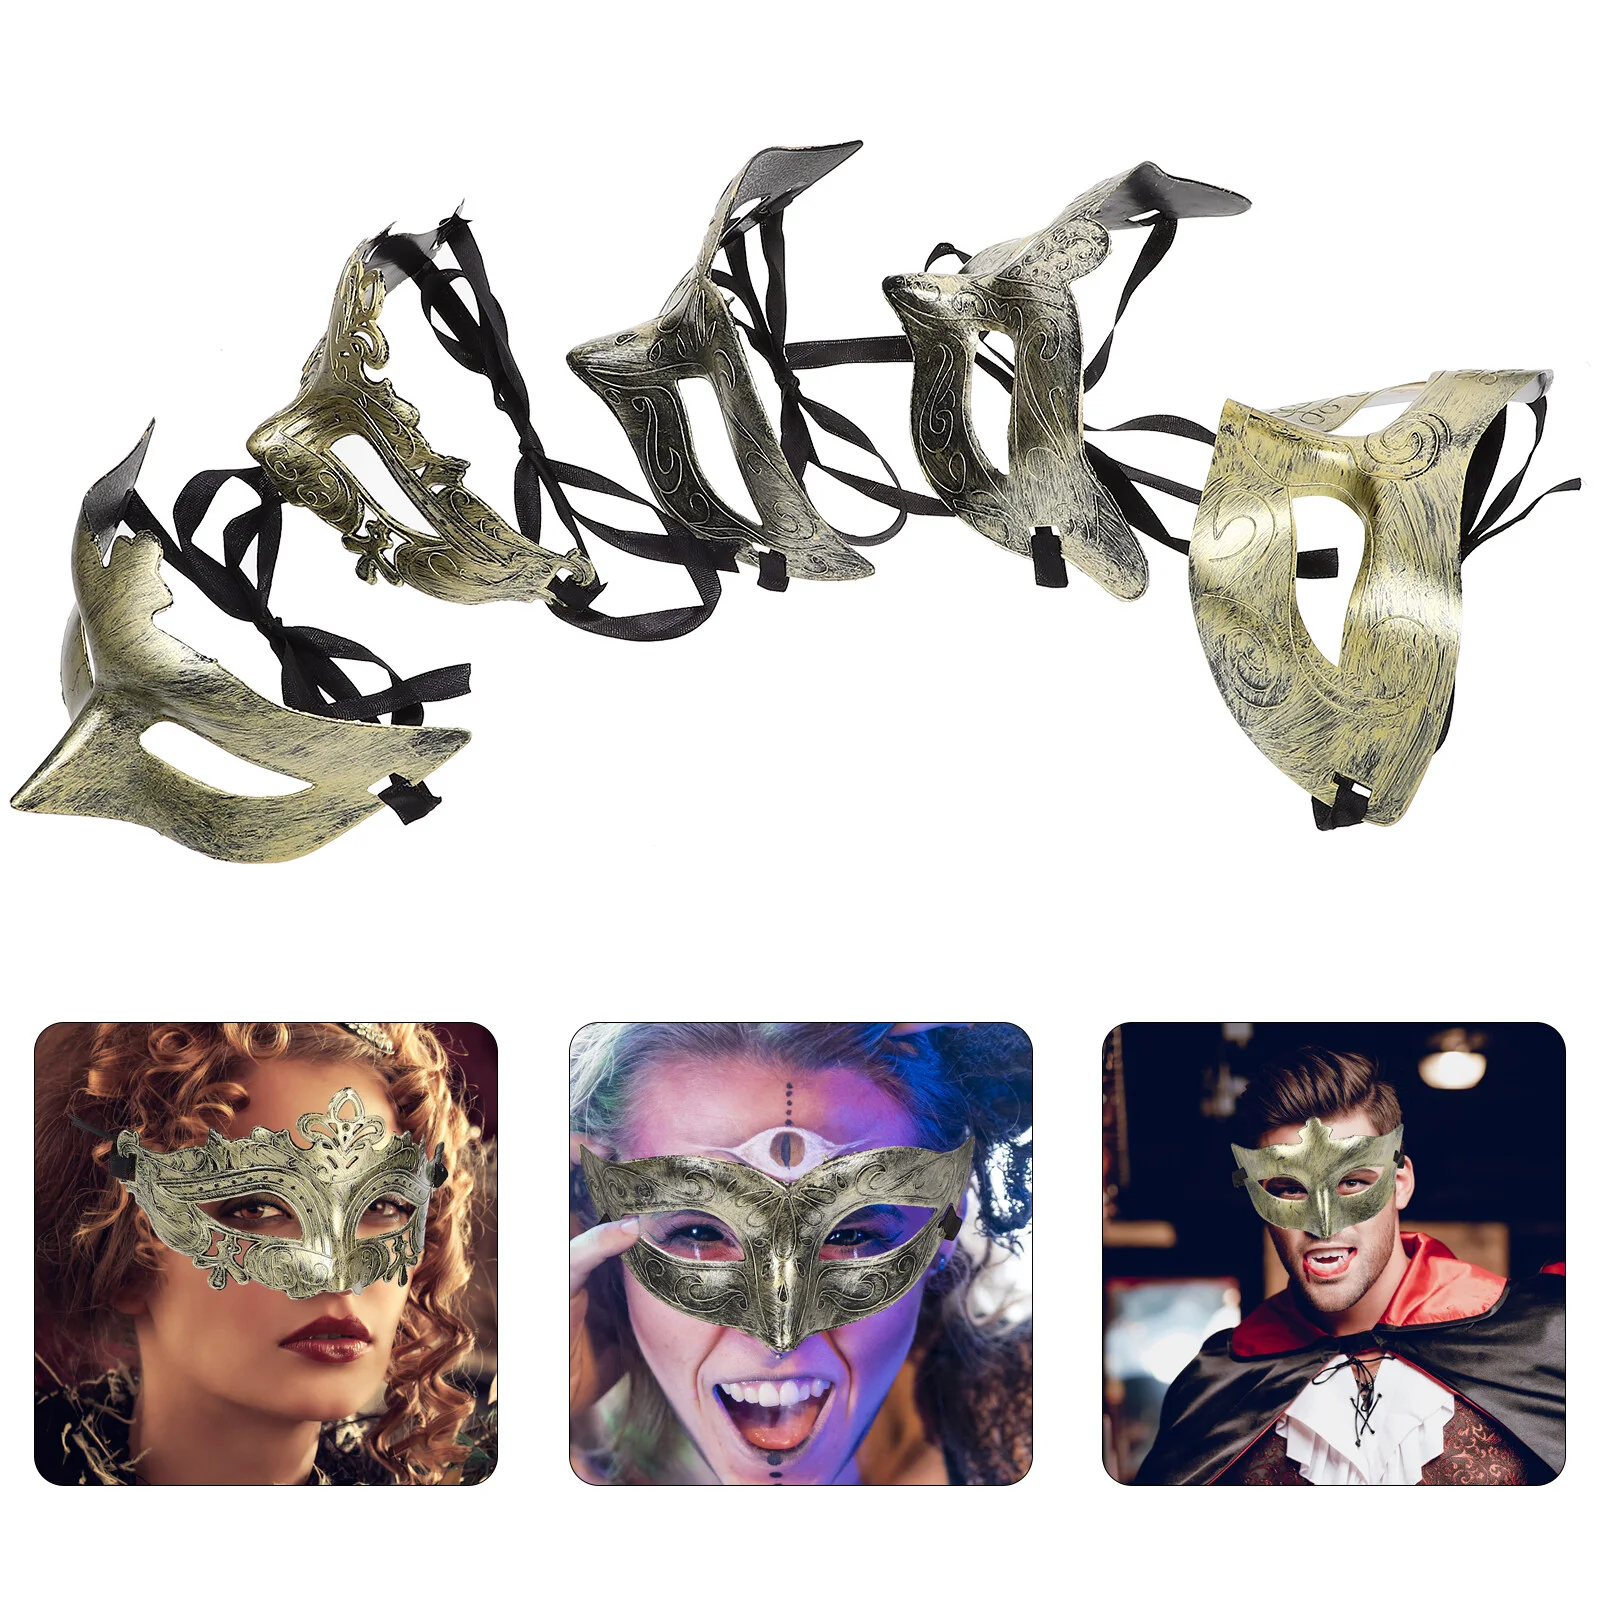 

25 Pcs Clothing Halloween Decoration Ball Animal Party Masquerade Dressing Up Masques Pointy Prop Supplies